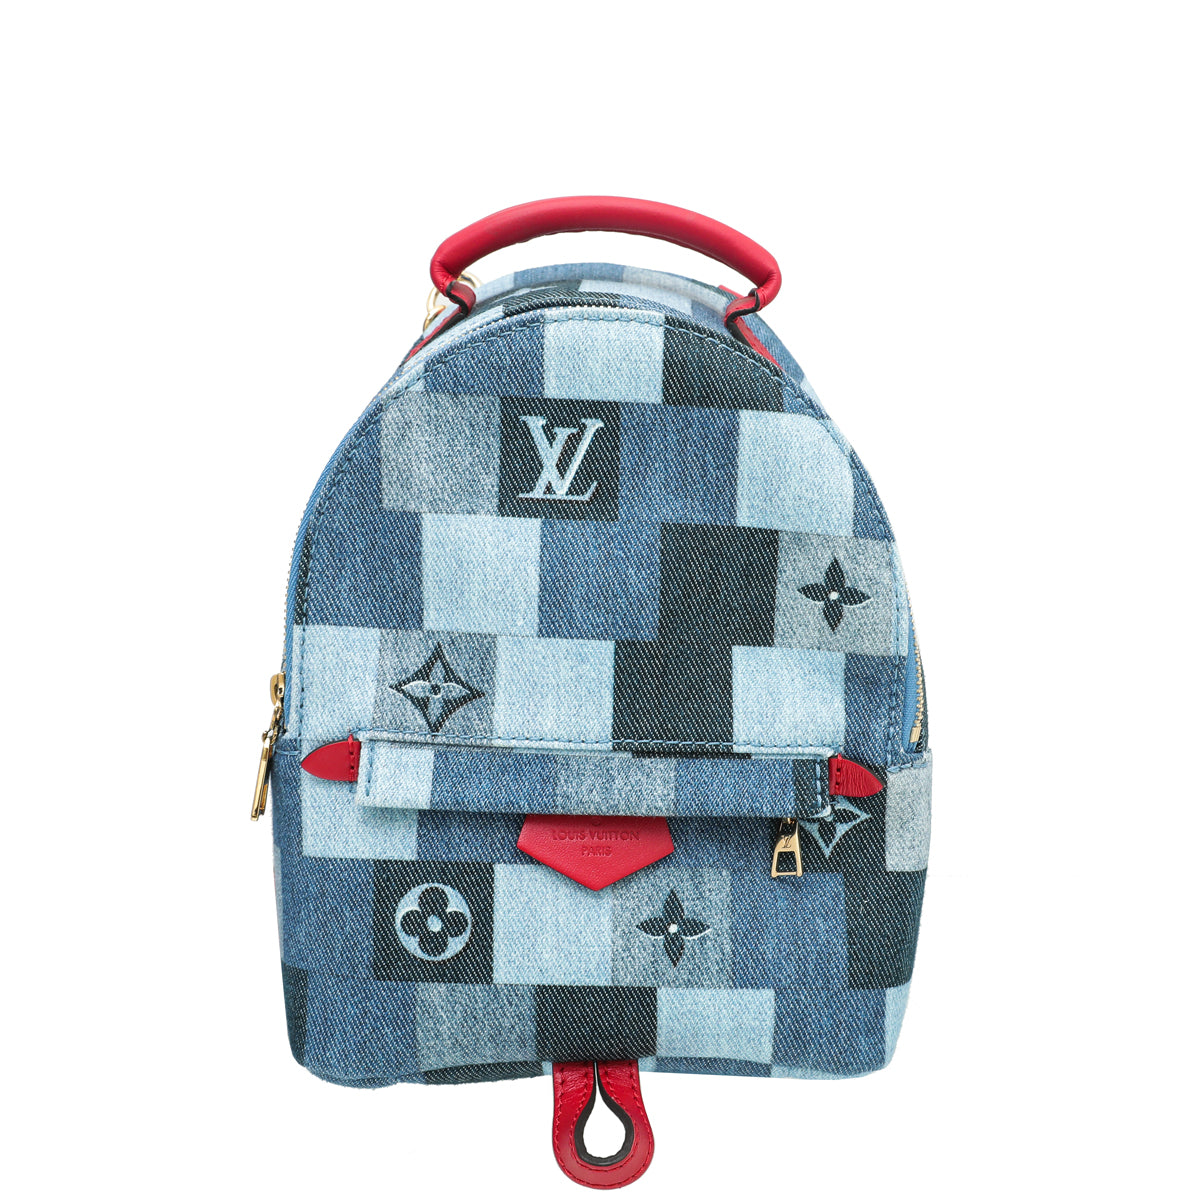 LOUIS VUITTON Monogram By The Pool Tiny Backpack Gris Bloom M45764 LV Auth  39091